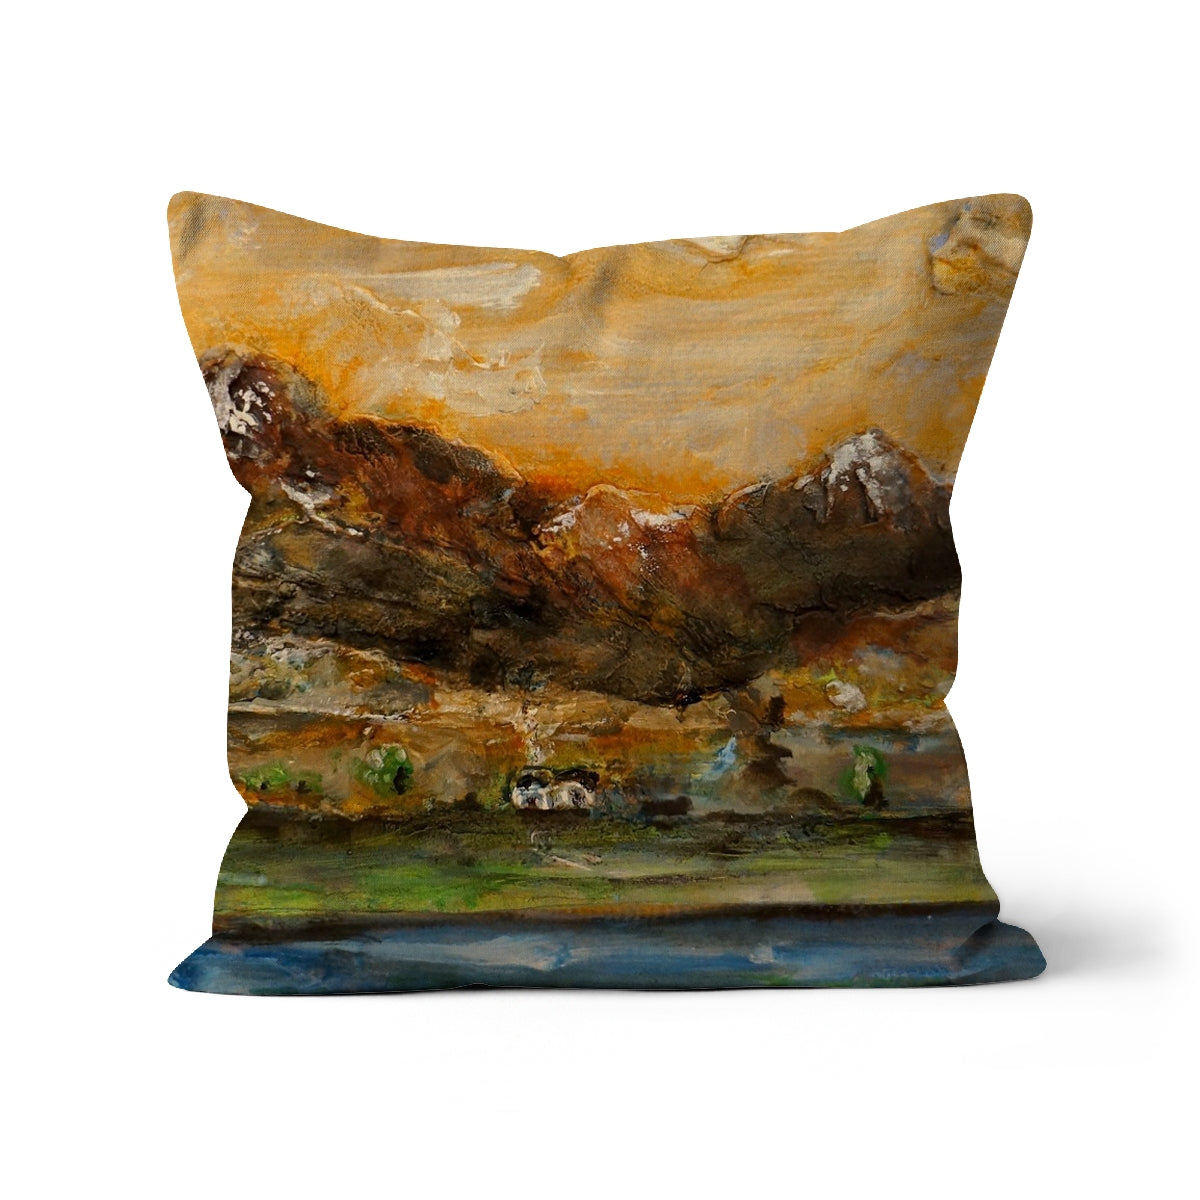 A Glencoe Cottage Art Gifts Cushion-Cushions-Glencoe Art Gallery-Canvas-18"x18"-Paintings, Prints, Homeware, Art Gifts From Scotland By Scottish Artist Kevin Hunter